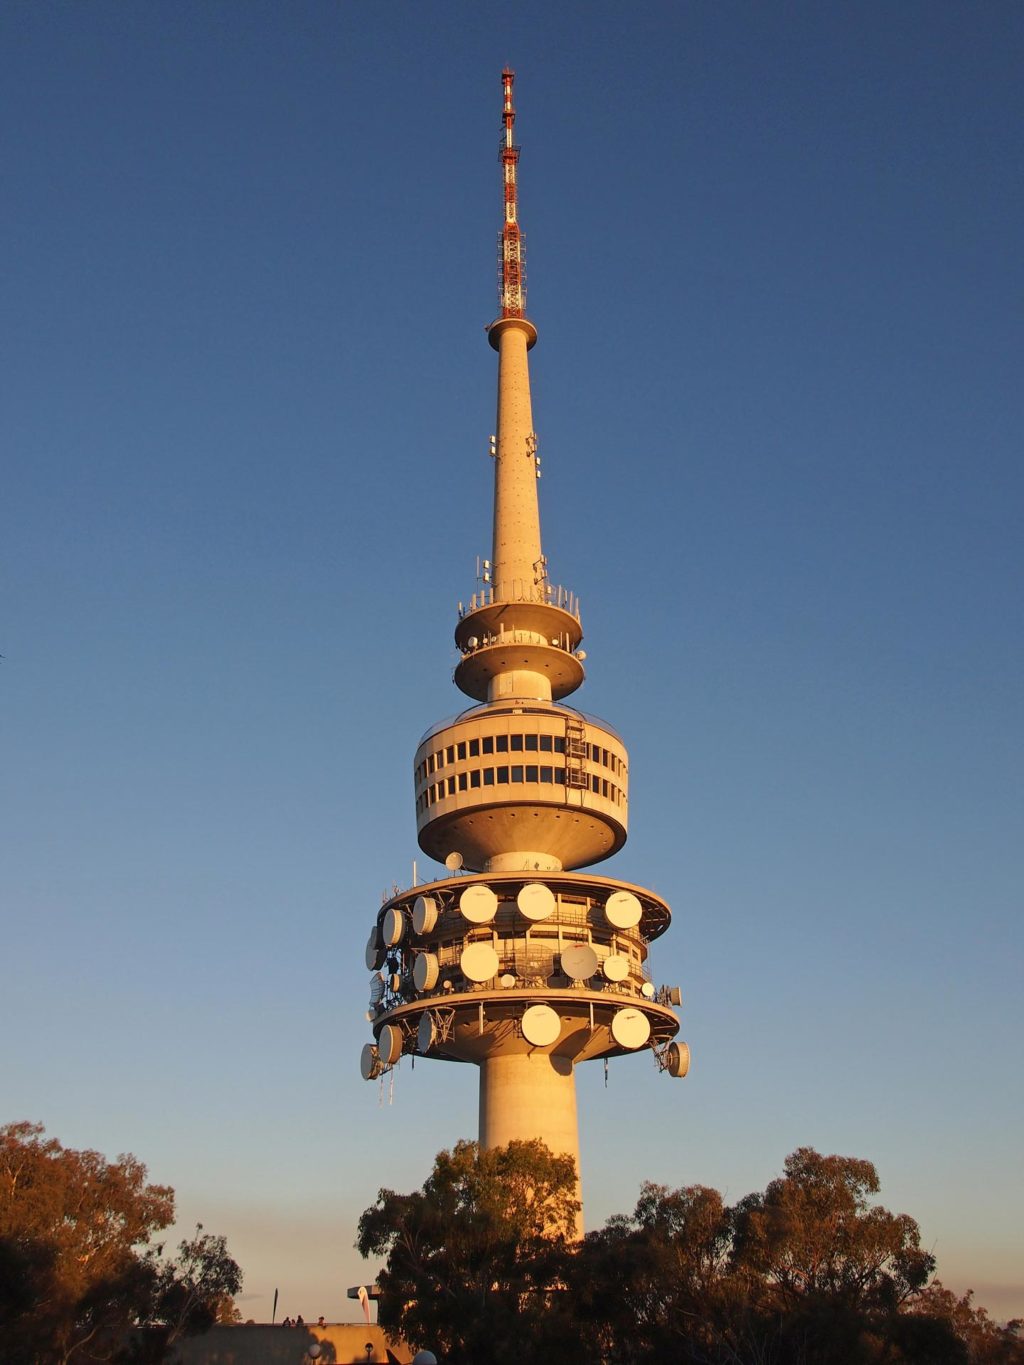 Black Mountain Tower (former Telstra Tower) in Canberra